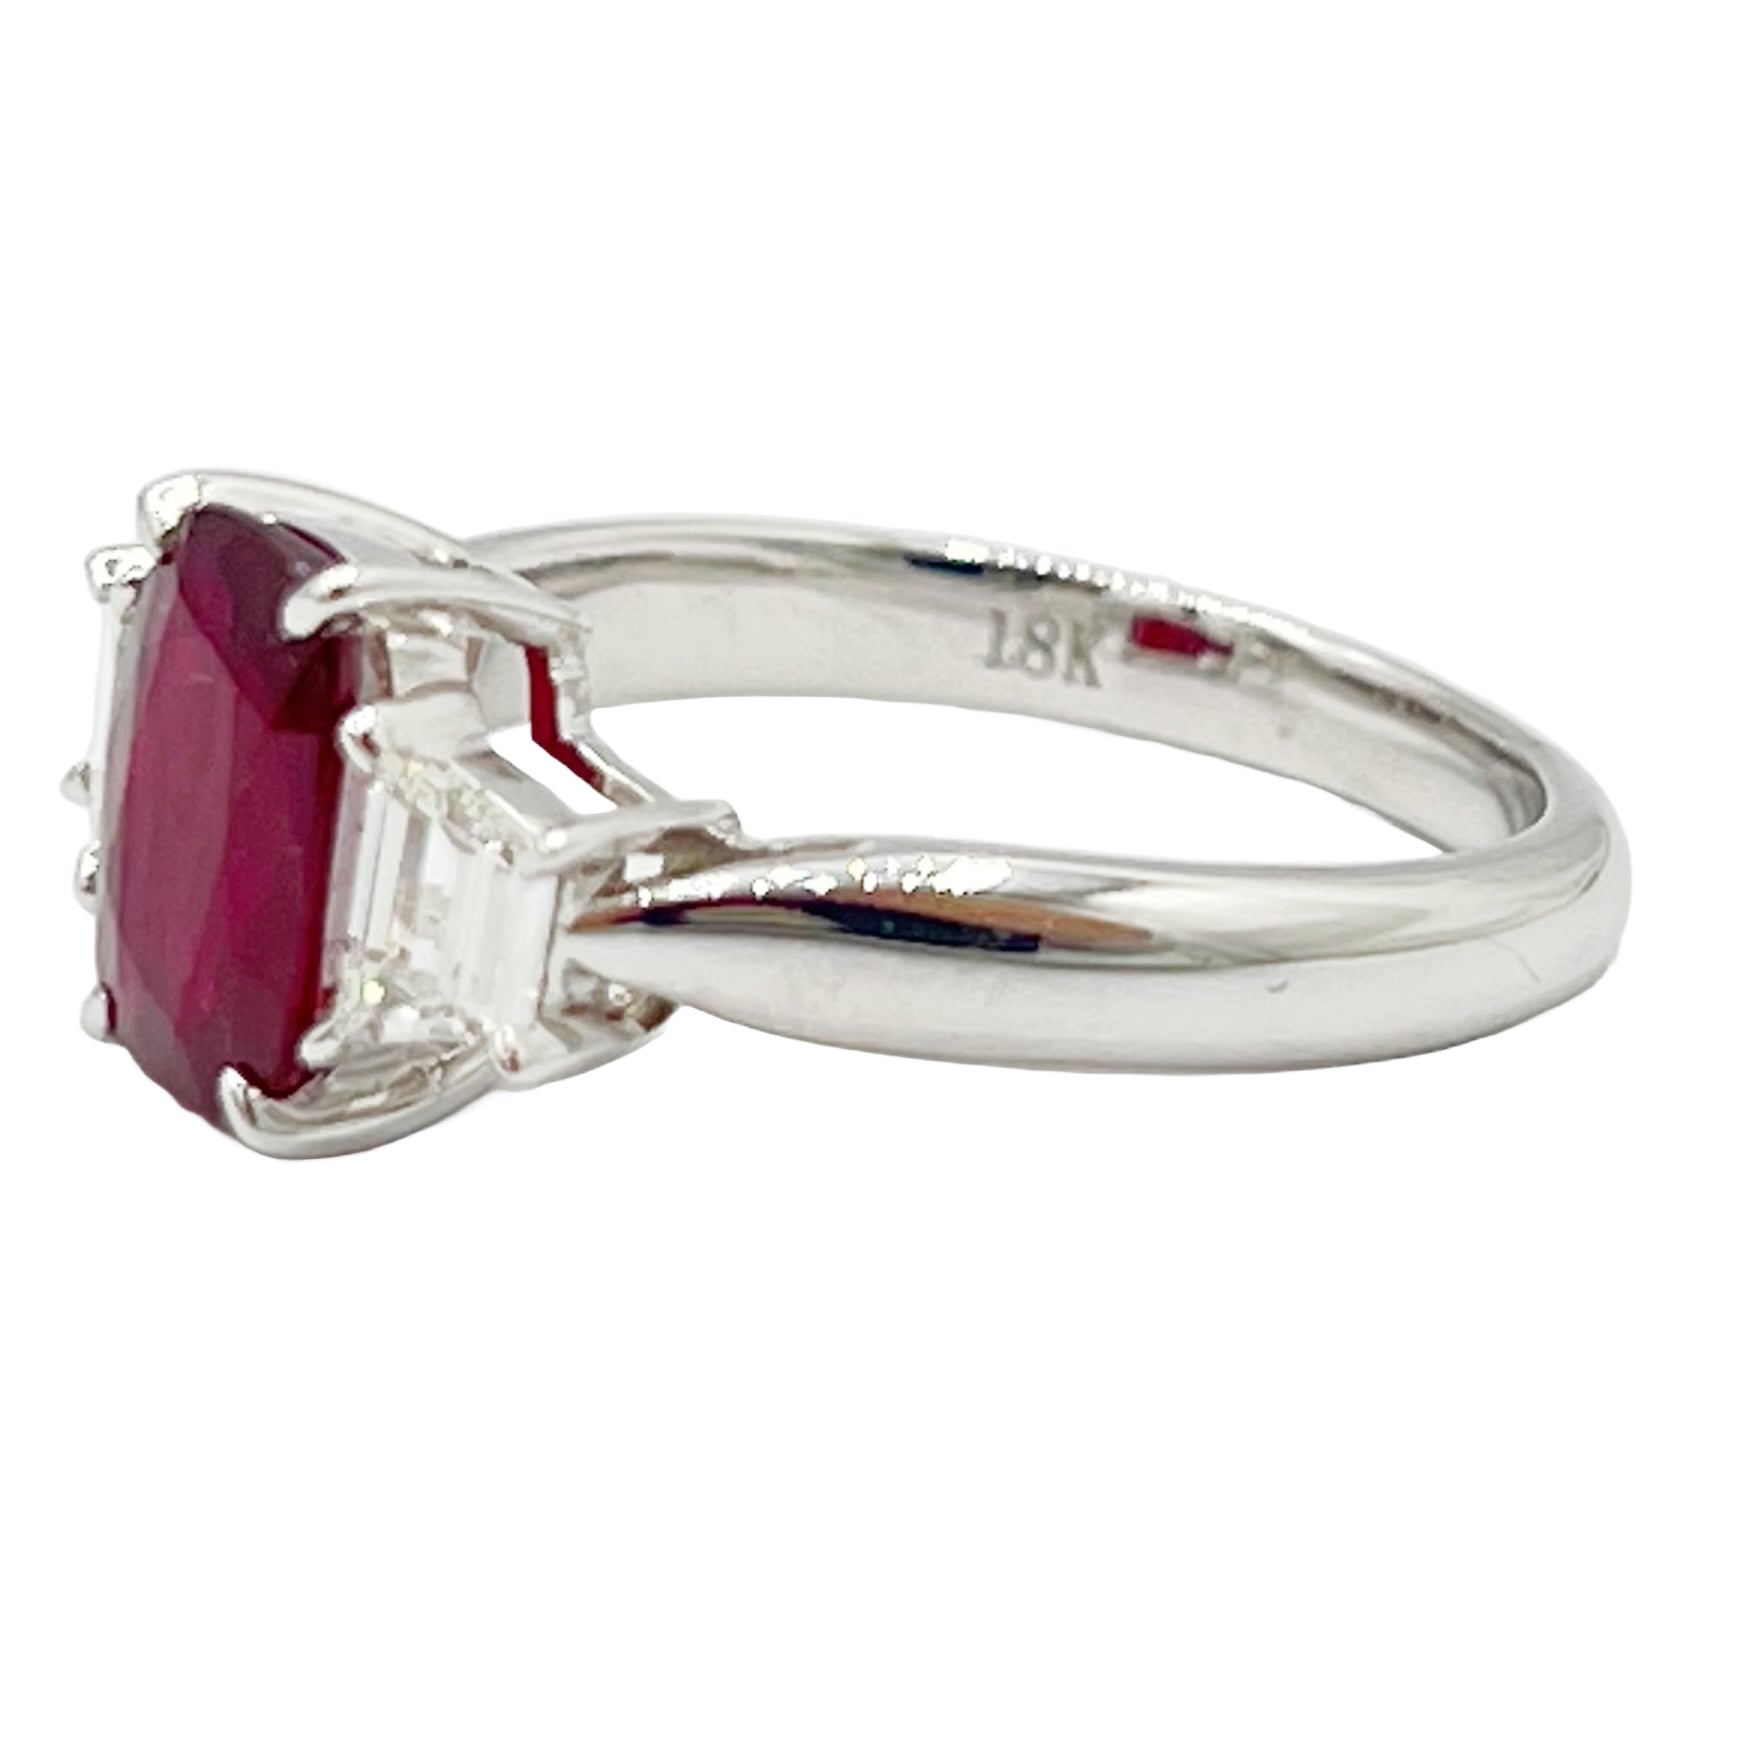 Ring 18KW/4.1G 1RUBY-2.01CT 2TRAP-0.43CT